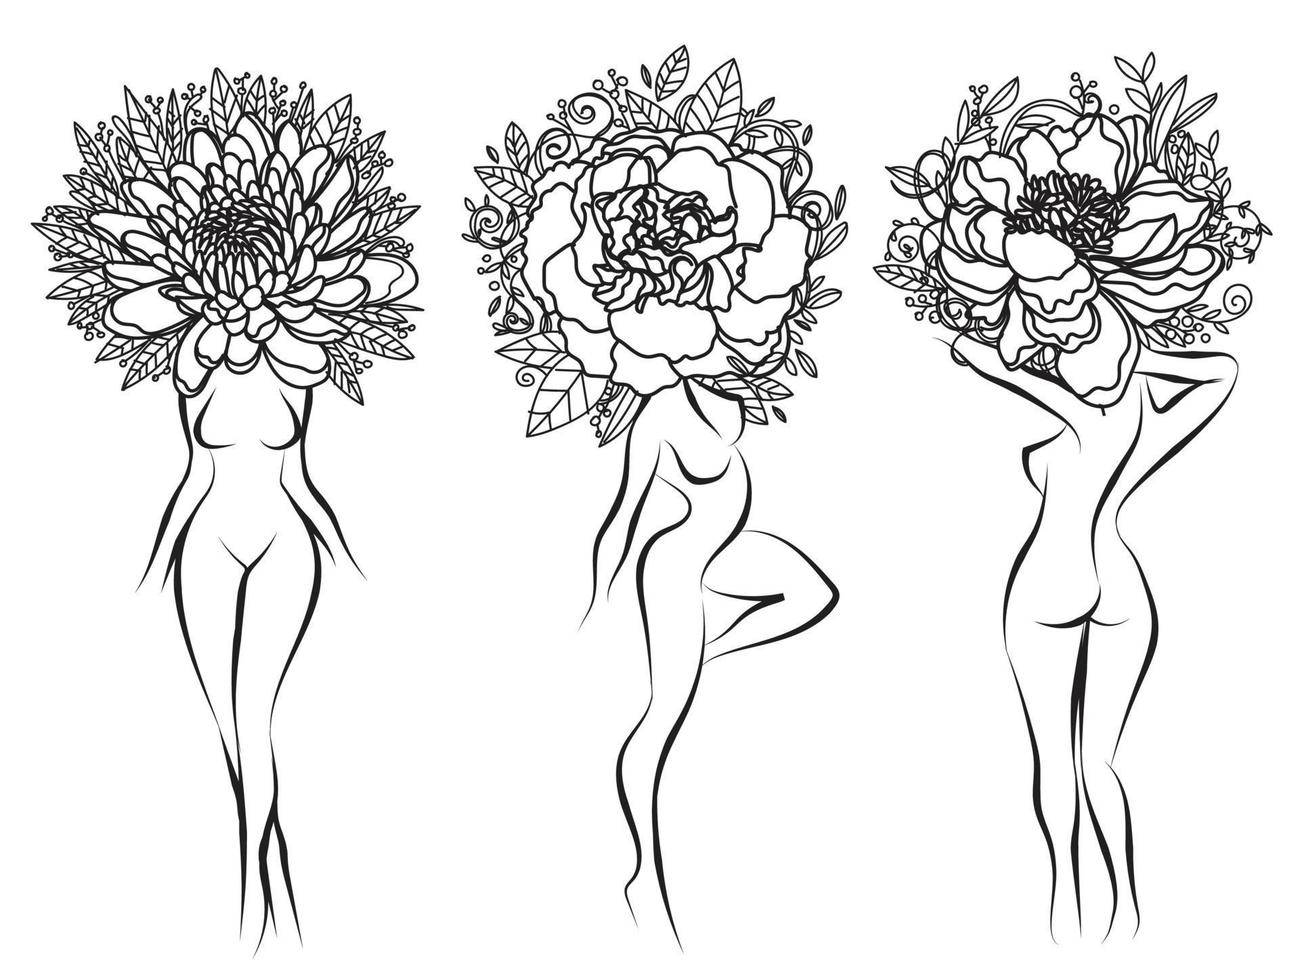 tattoo woman with flower hand drawing and sketch black and white vector